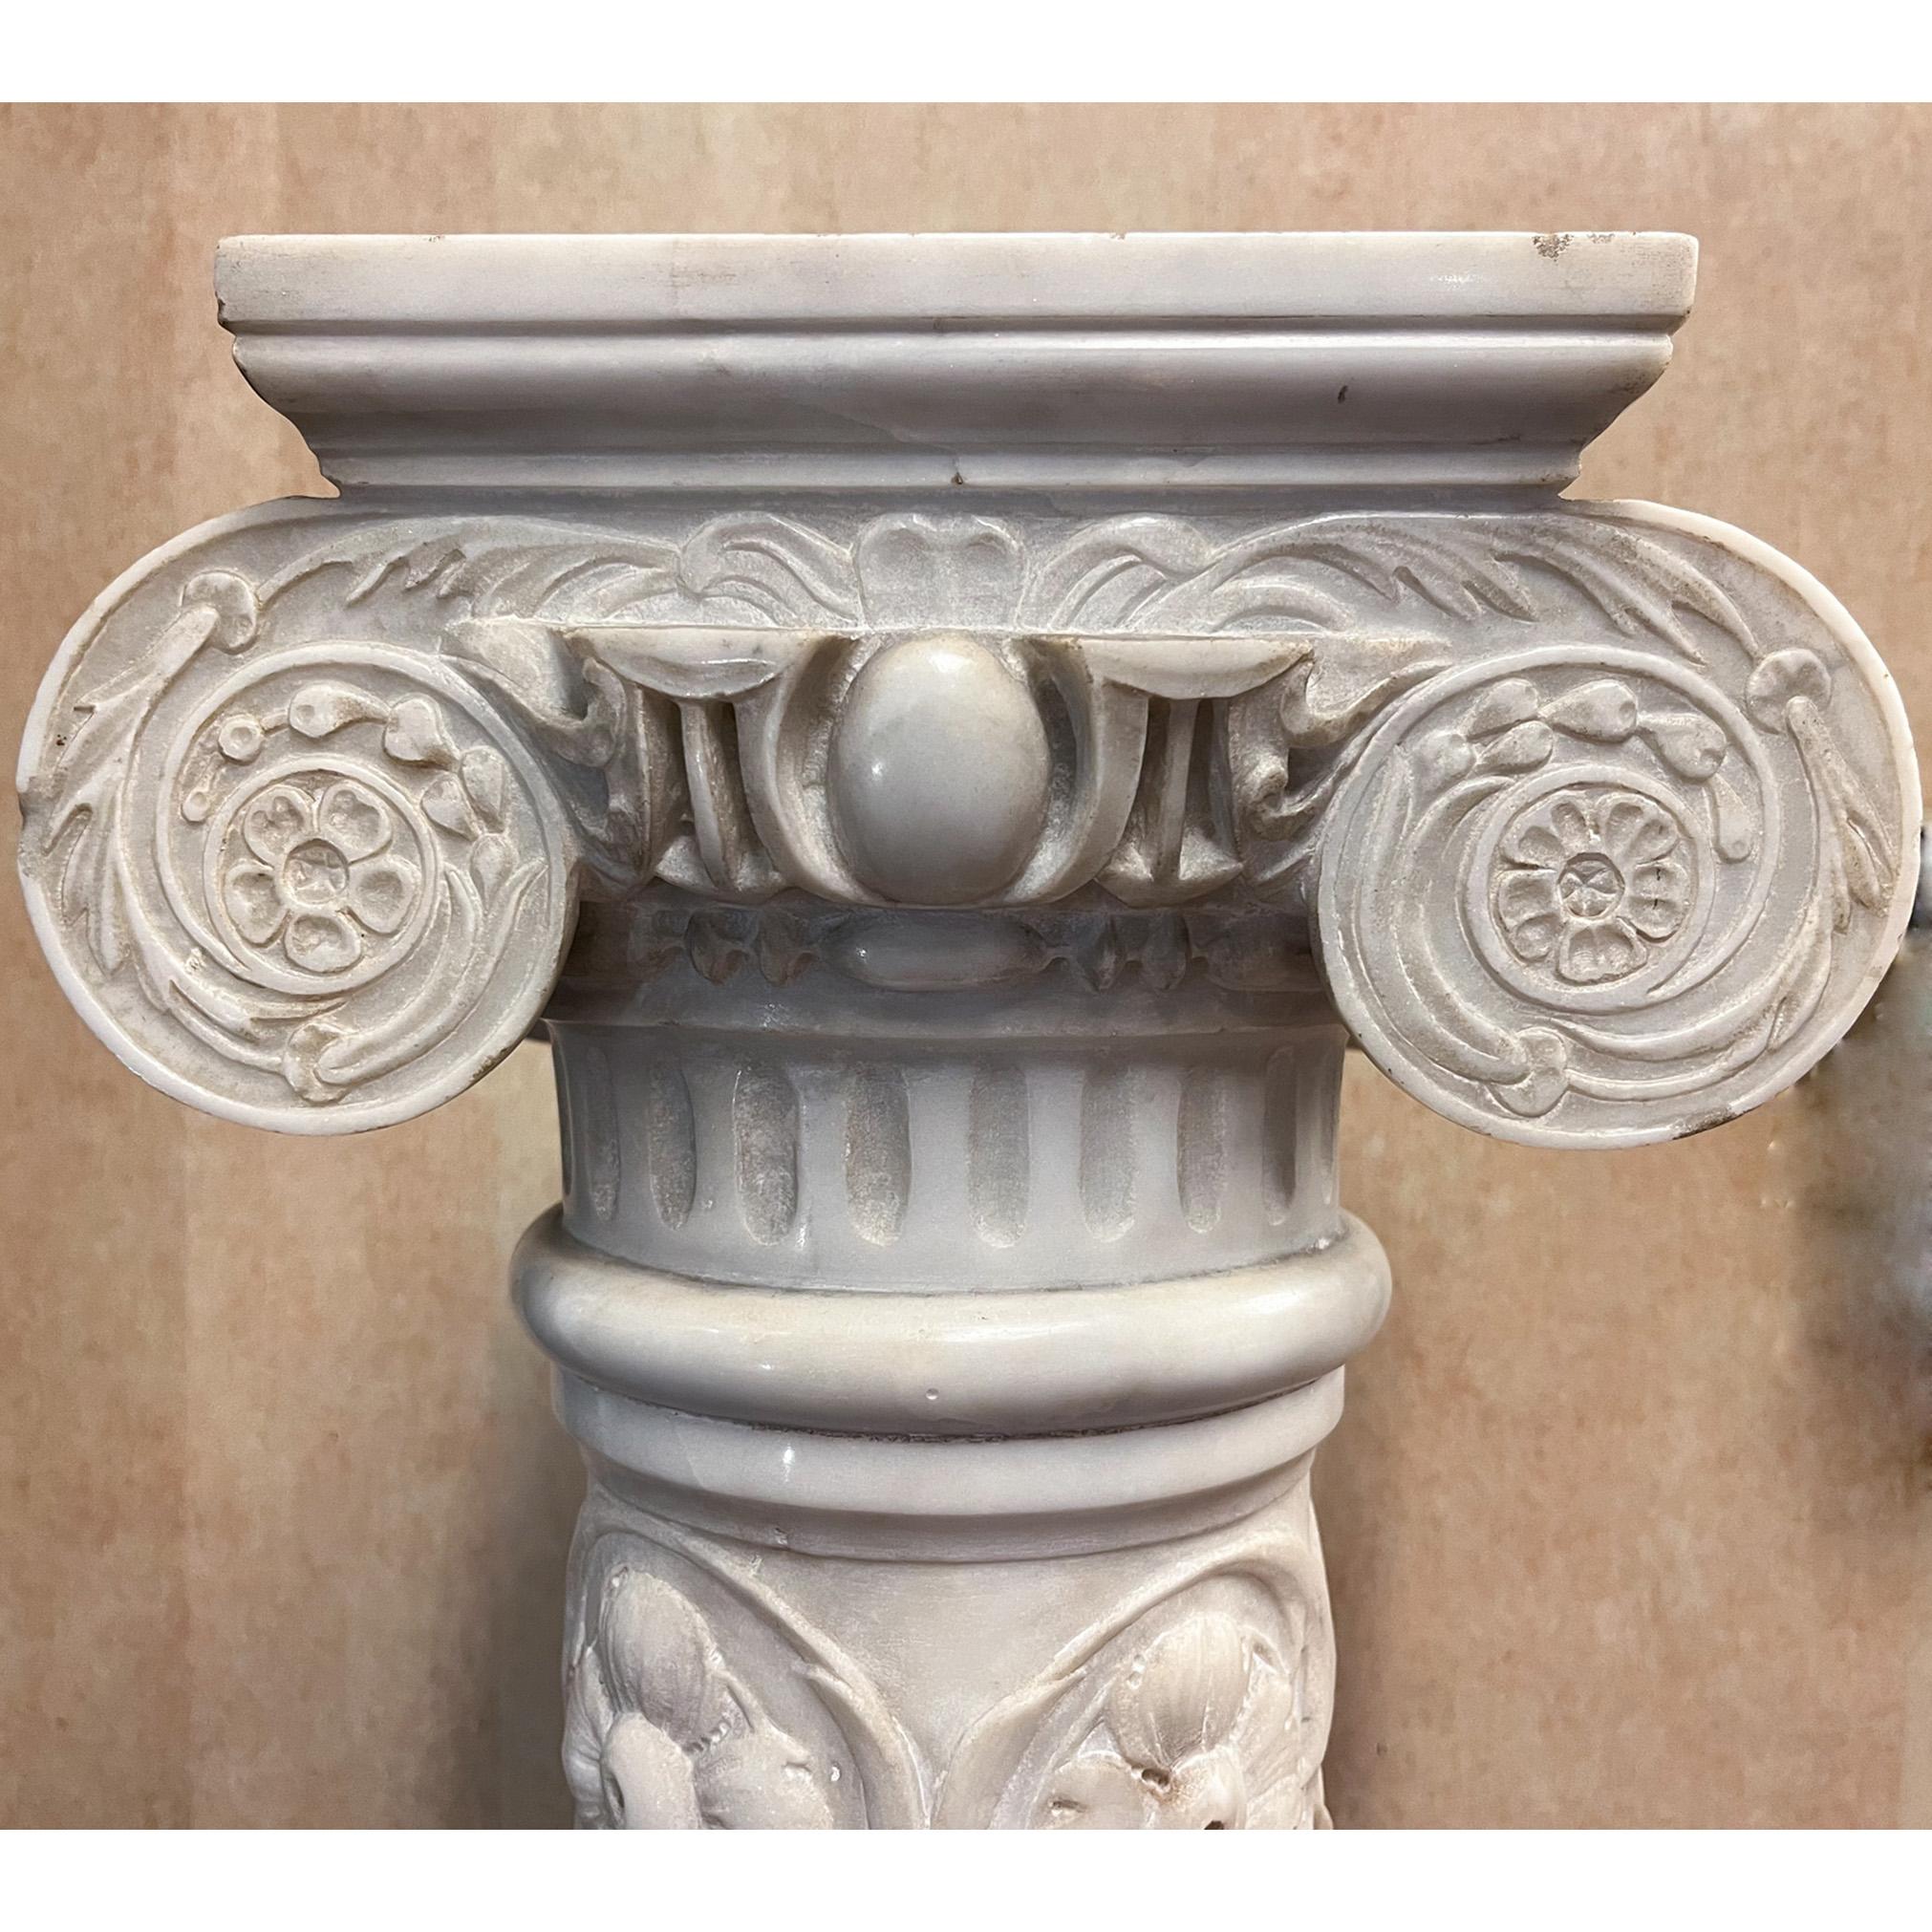 Tall Ionic column pedestal made of white marble with carved high relief garlands and low relief floral, foliage and mythical animal details. Square crown and base with scroll capital, shaft reliefs done utilizing a reflective design motif throughout